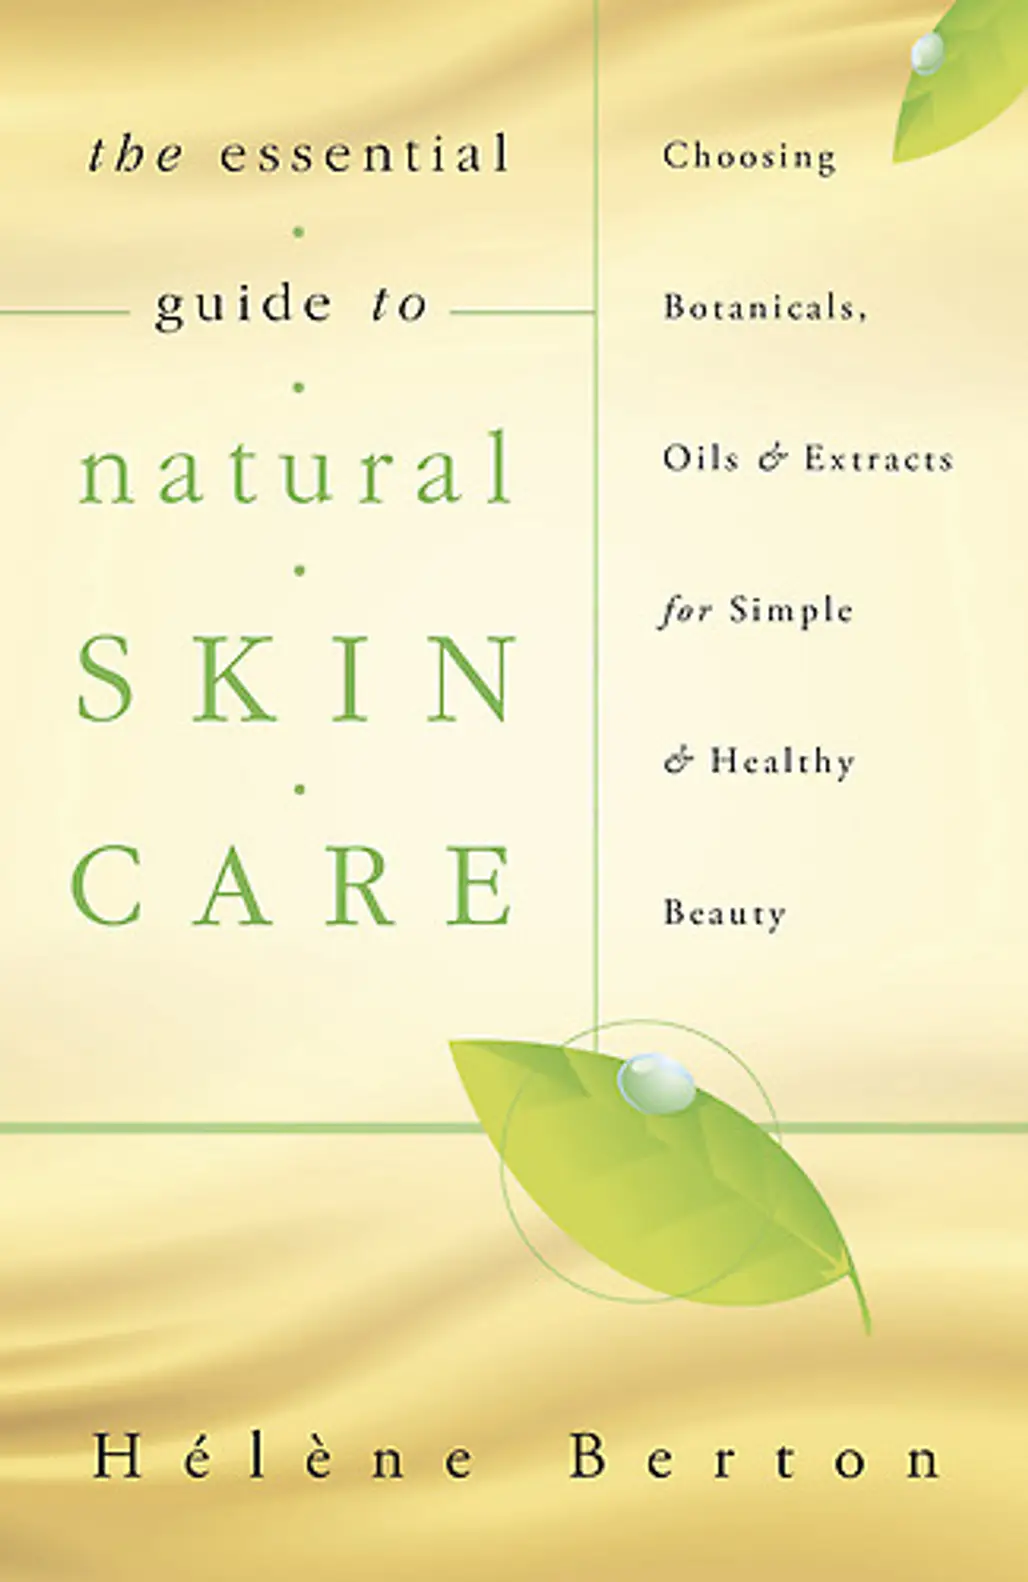 The Essential Guide to Natural Skin Care by Hélène Berton